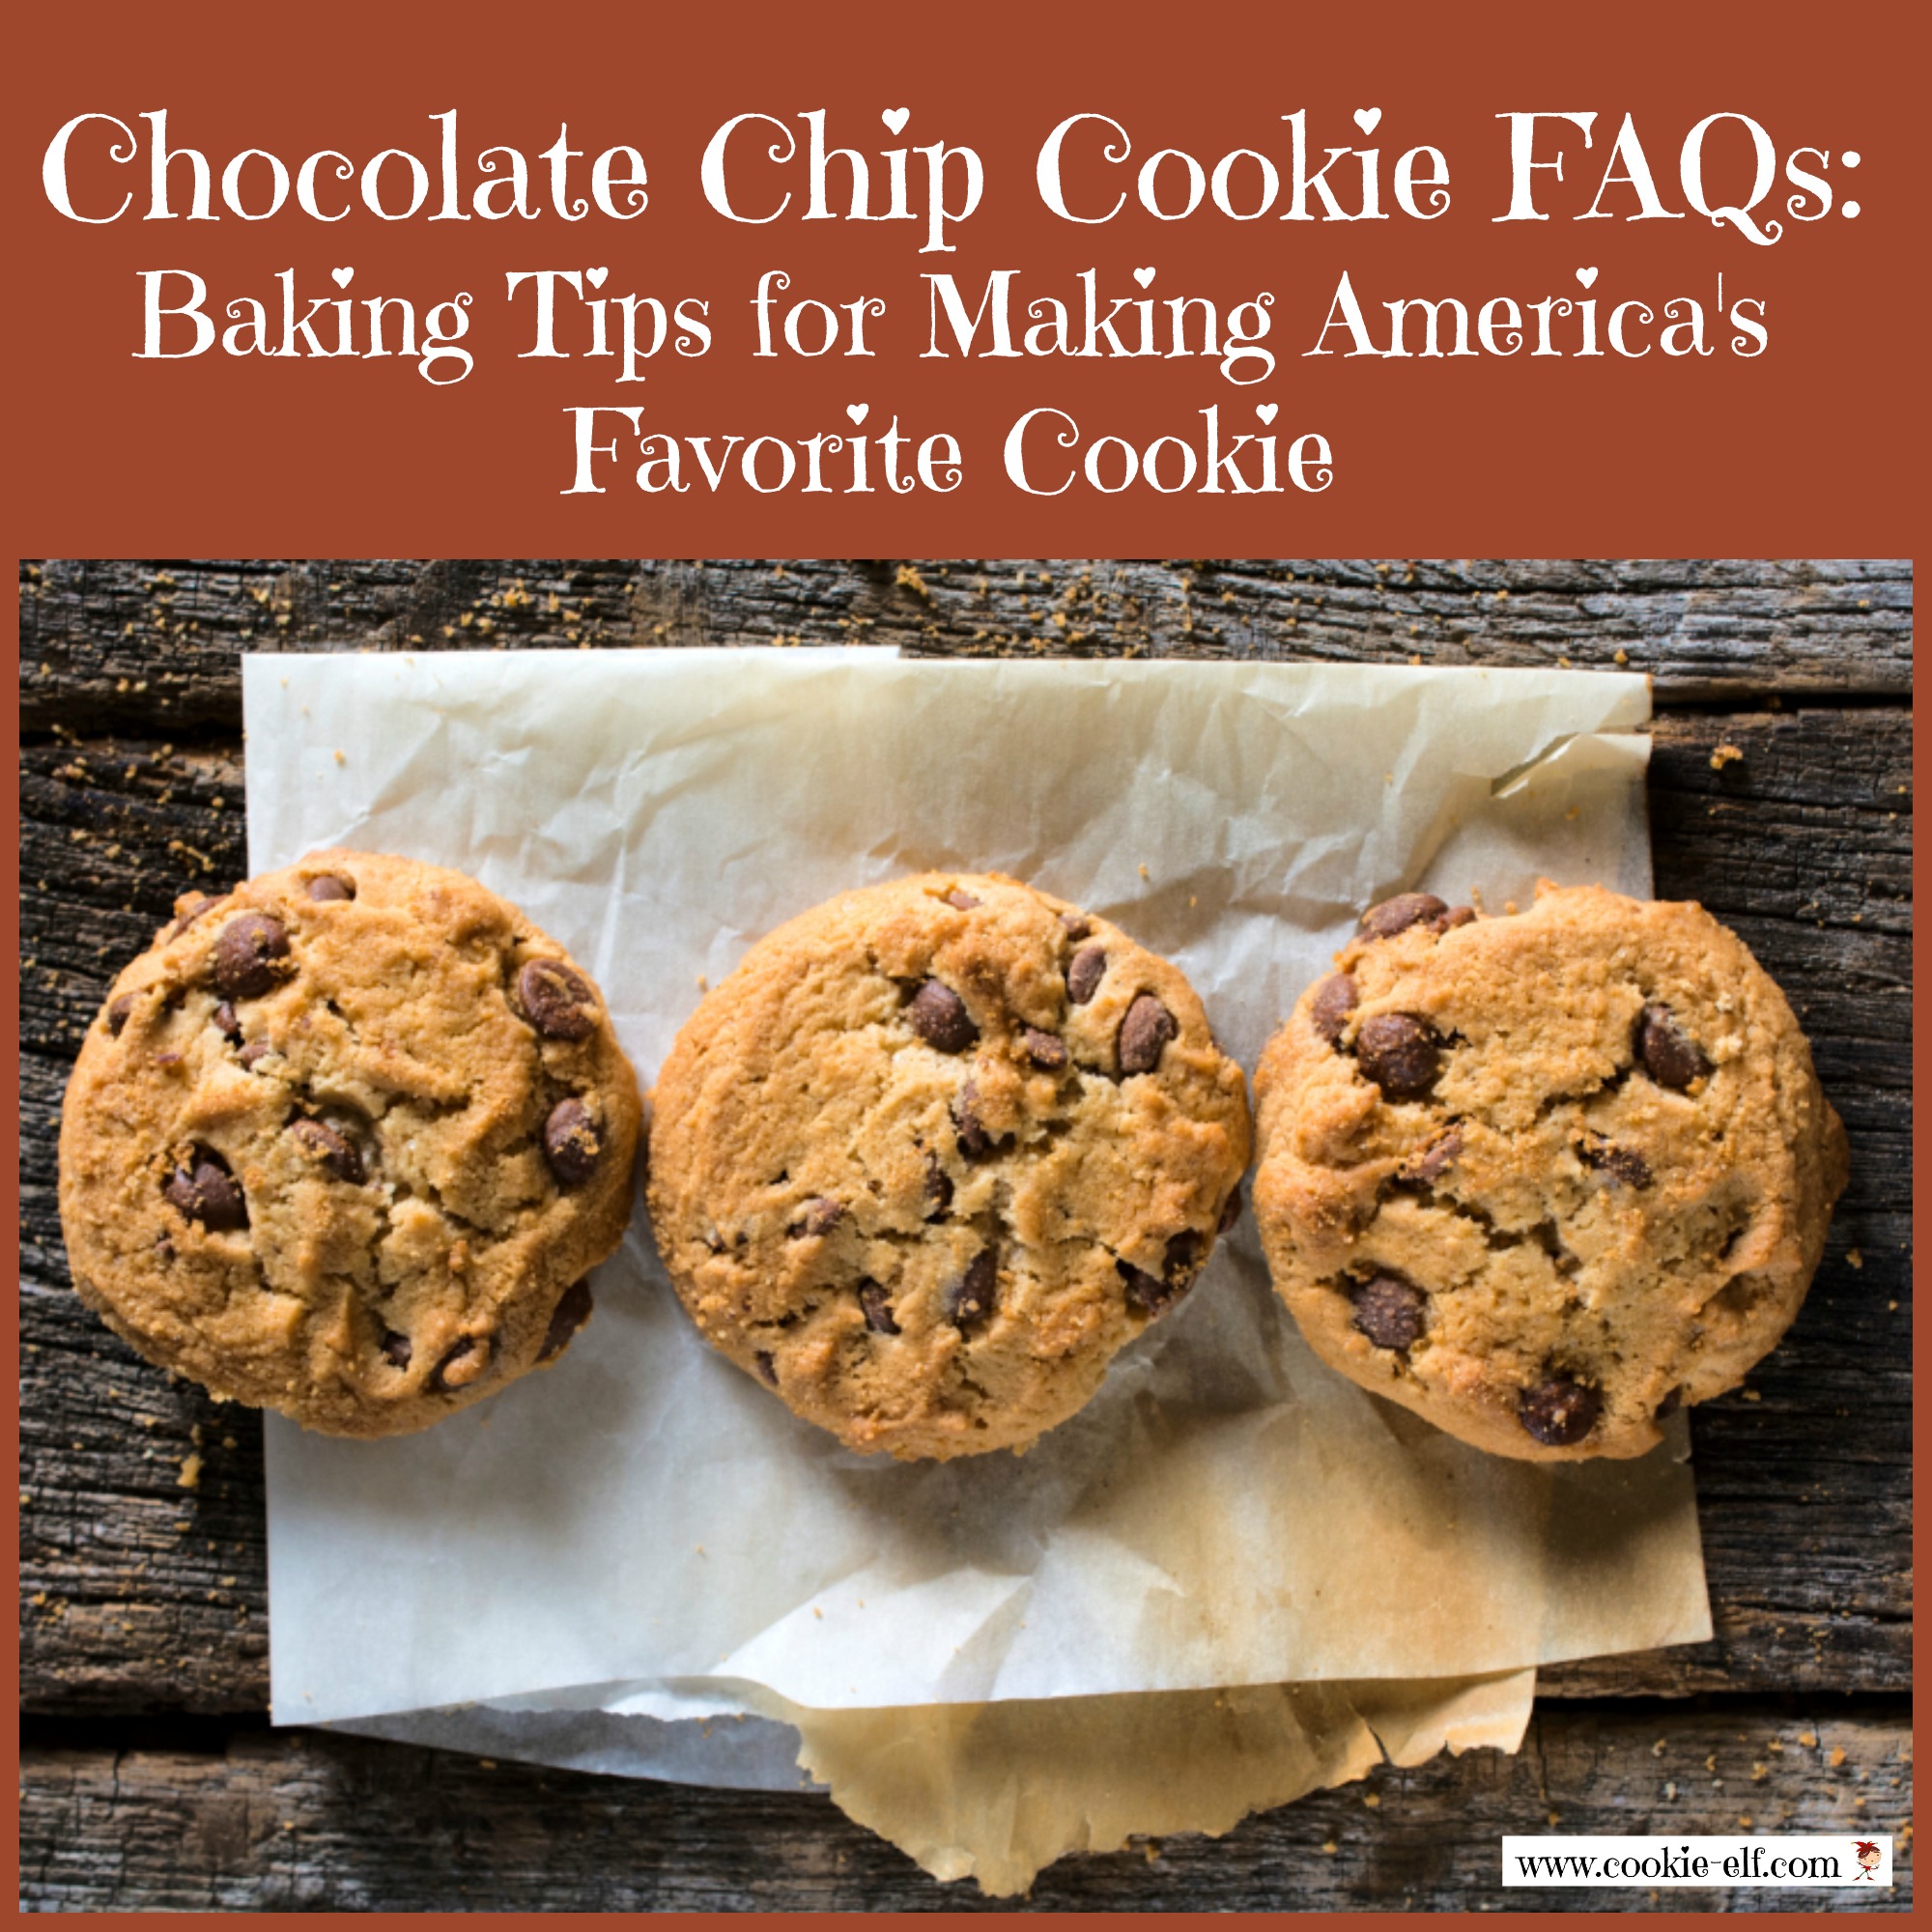 Chocolate Chip Cookie FAQs from The Cookie Elf